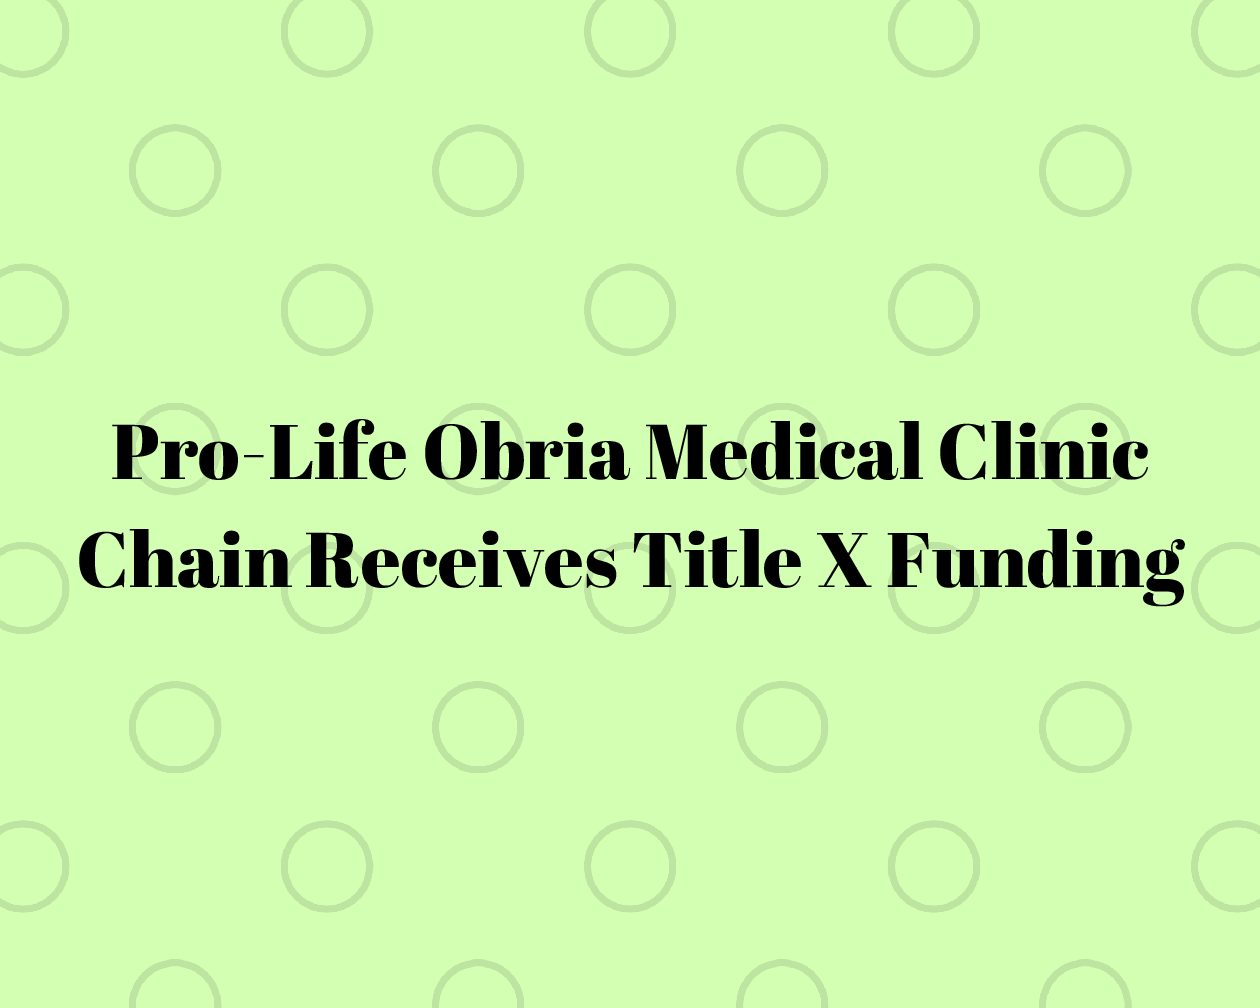 Pro-Life Obria Medical Clinic Chain Receives Title X Funding